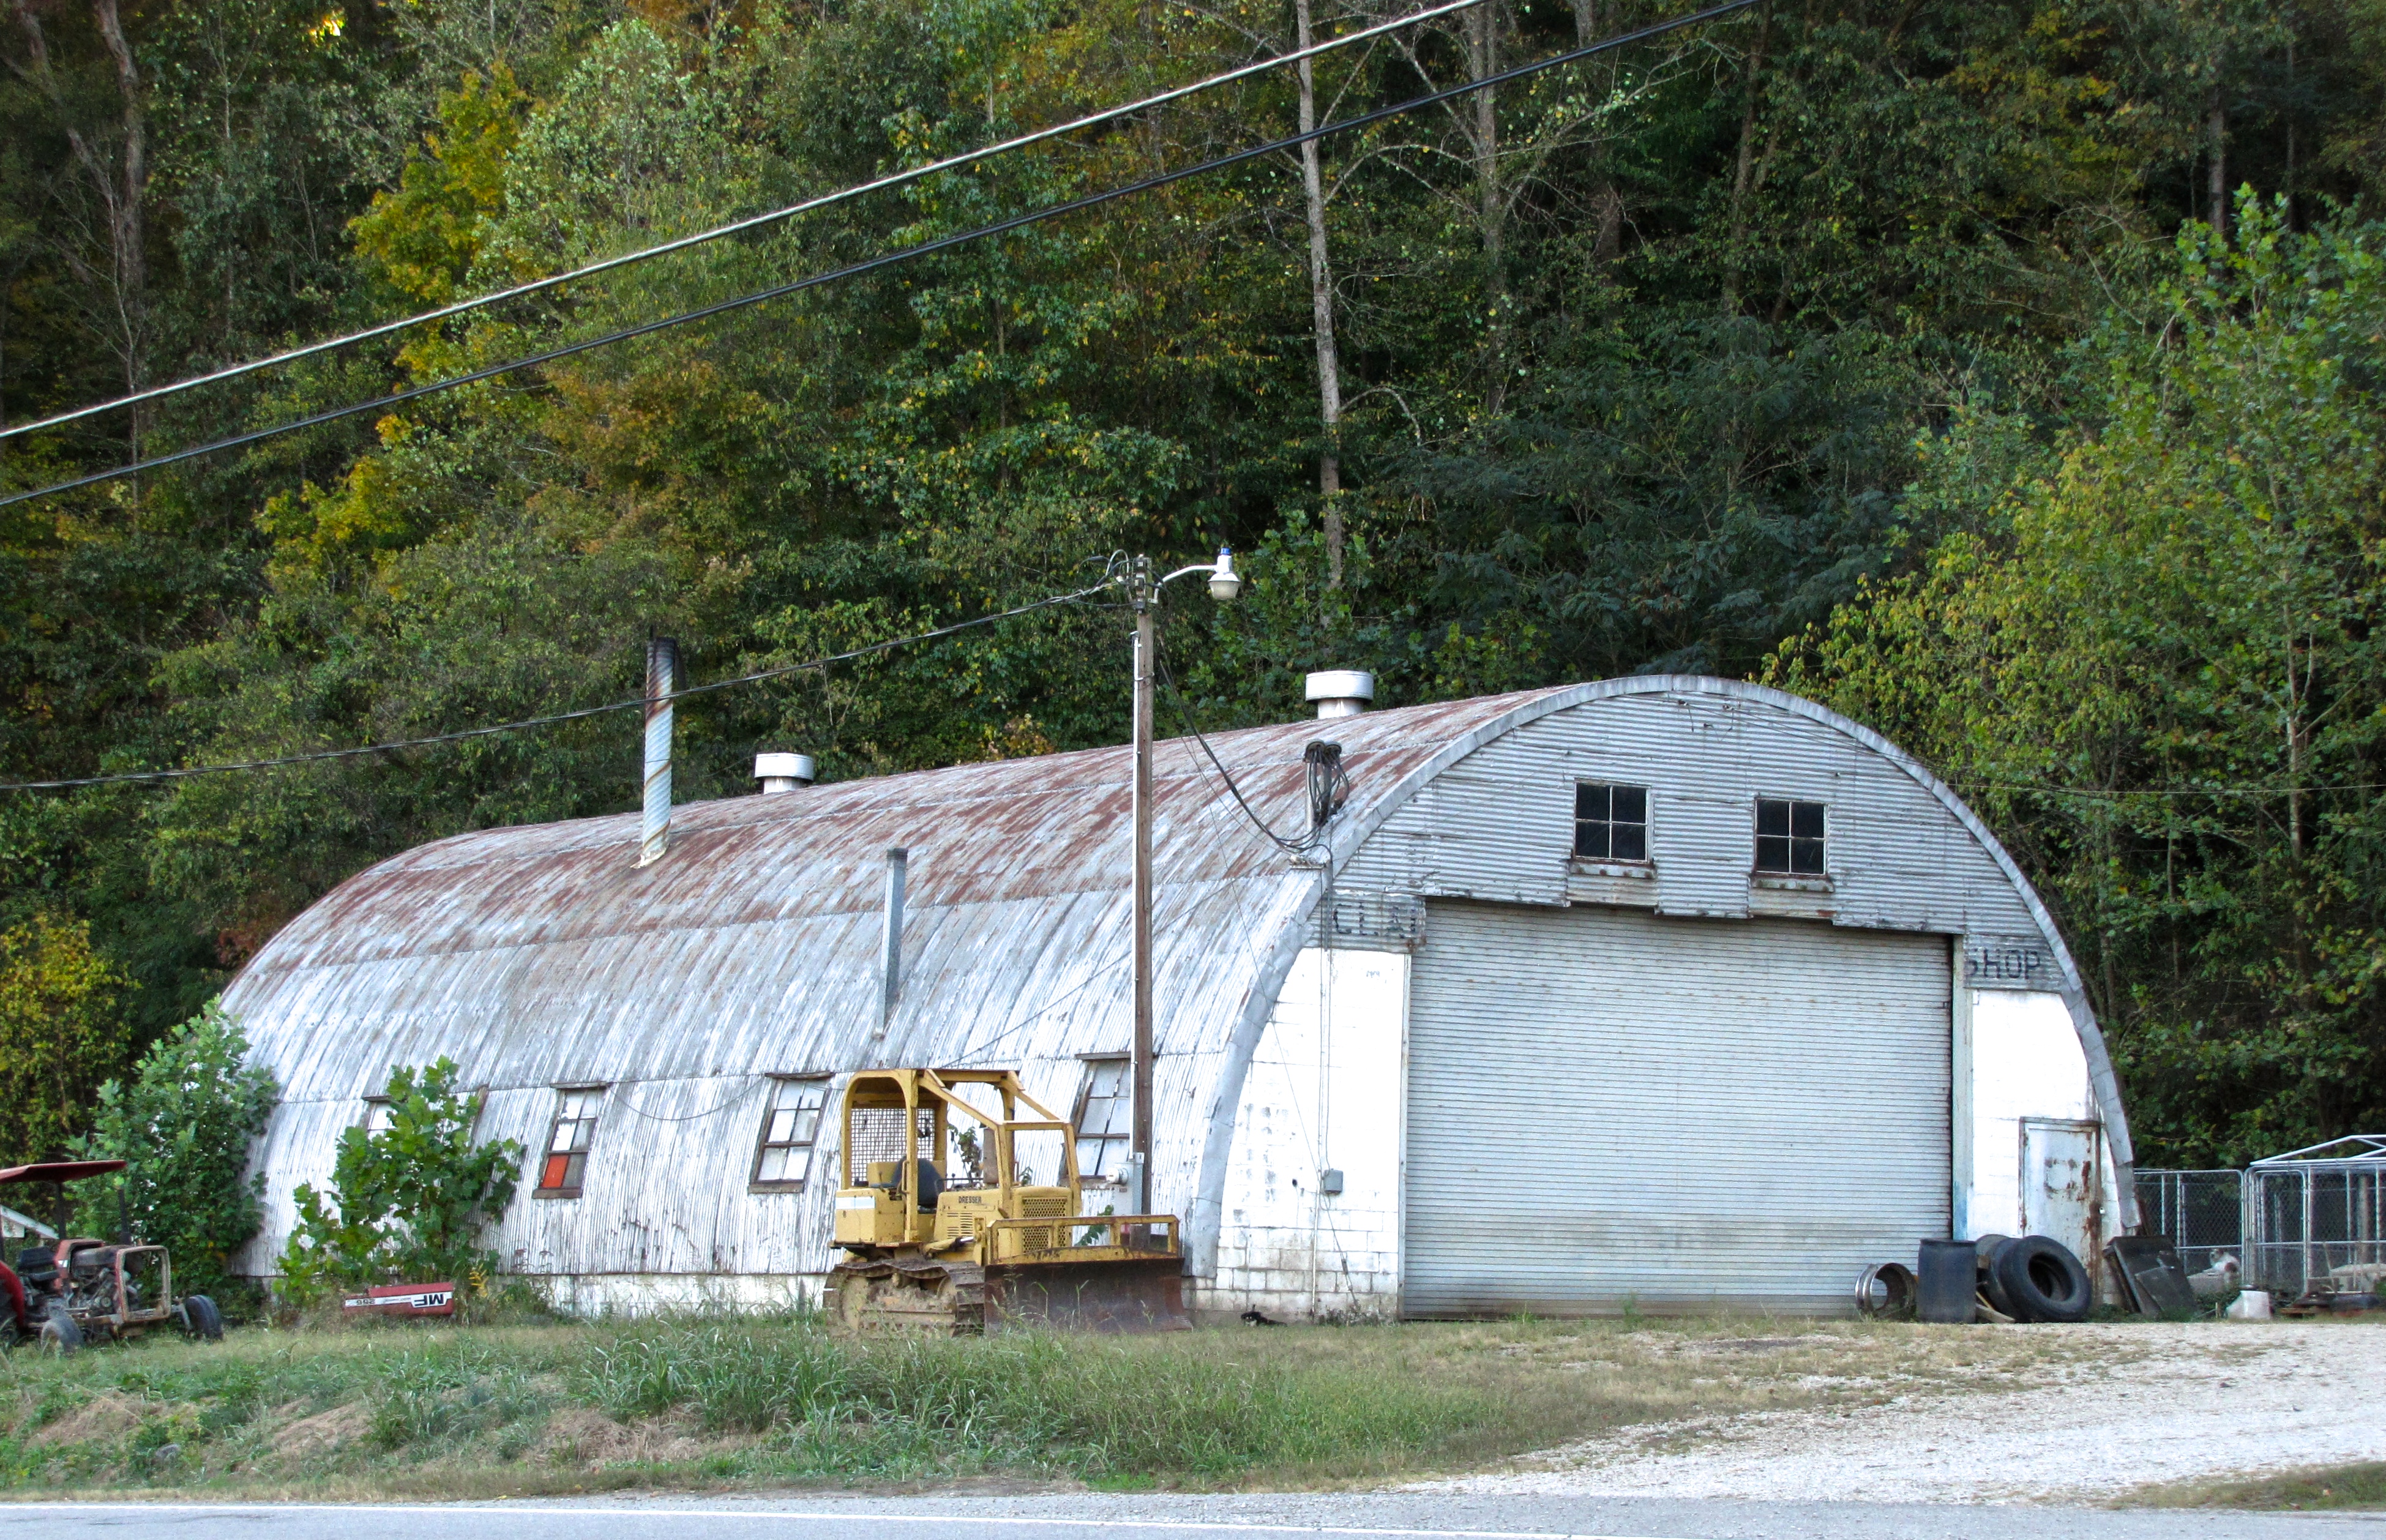 quonset hut in About Us, DE